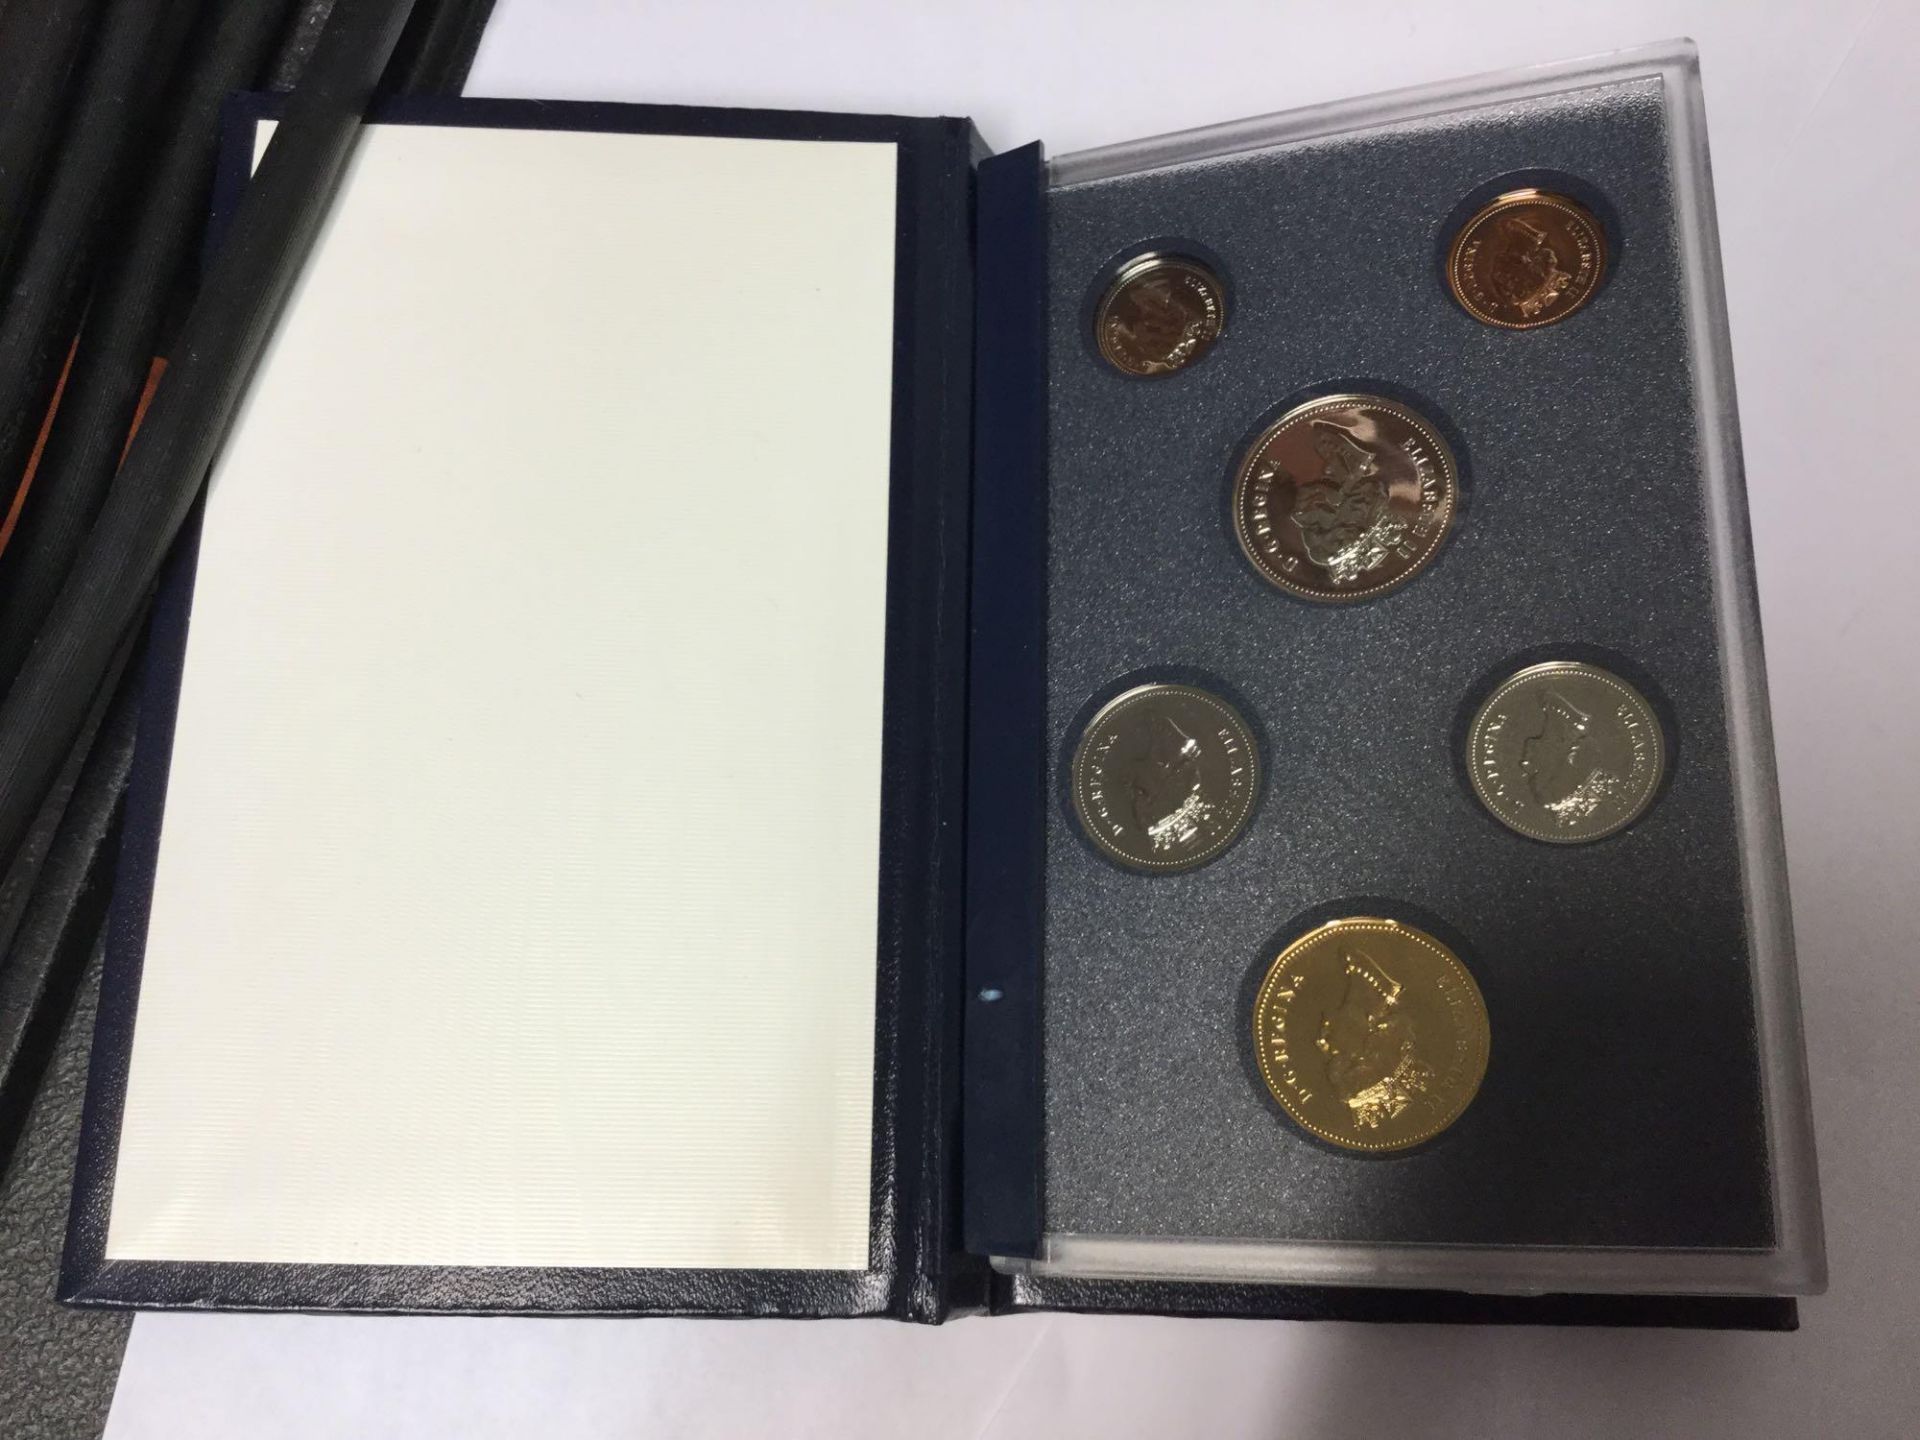 Royal Canadian Mint - 1992 Specimen Set With Case and Box - Image 3 of 3